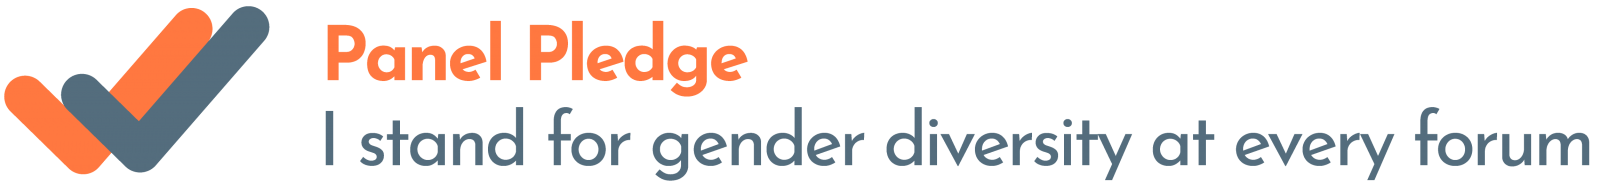 the Panel Pledge logo: "I stand for gender diversity at every forum"